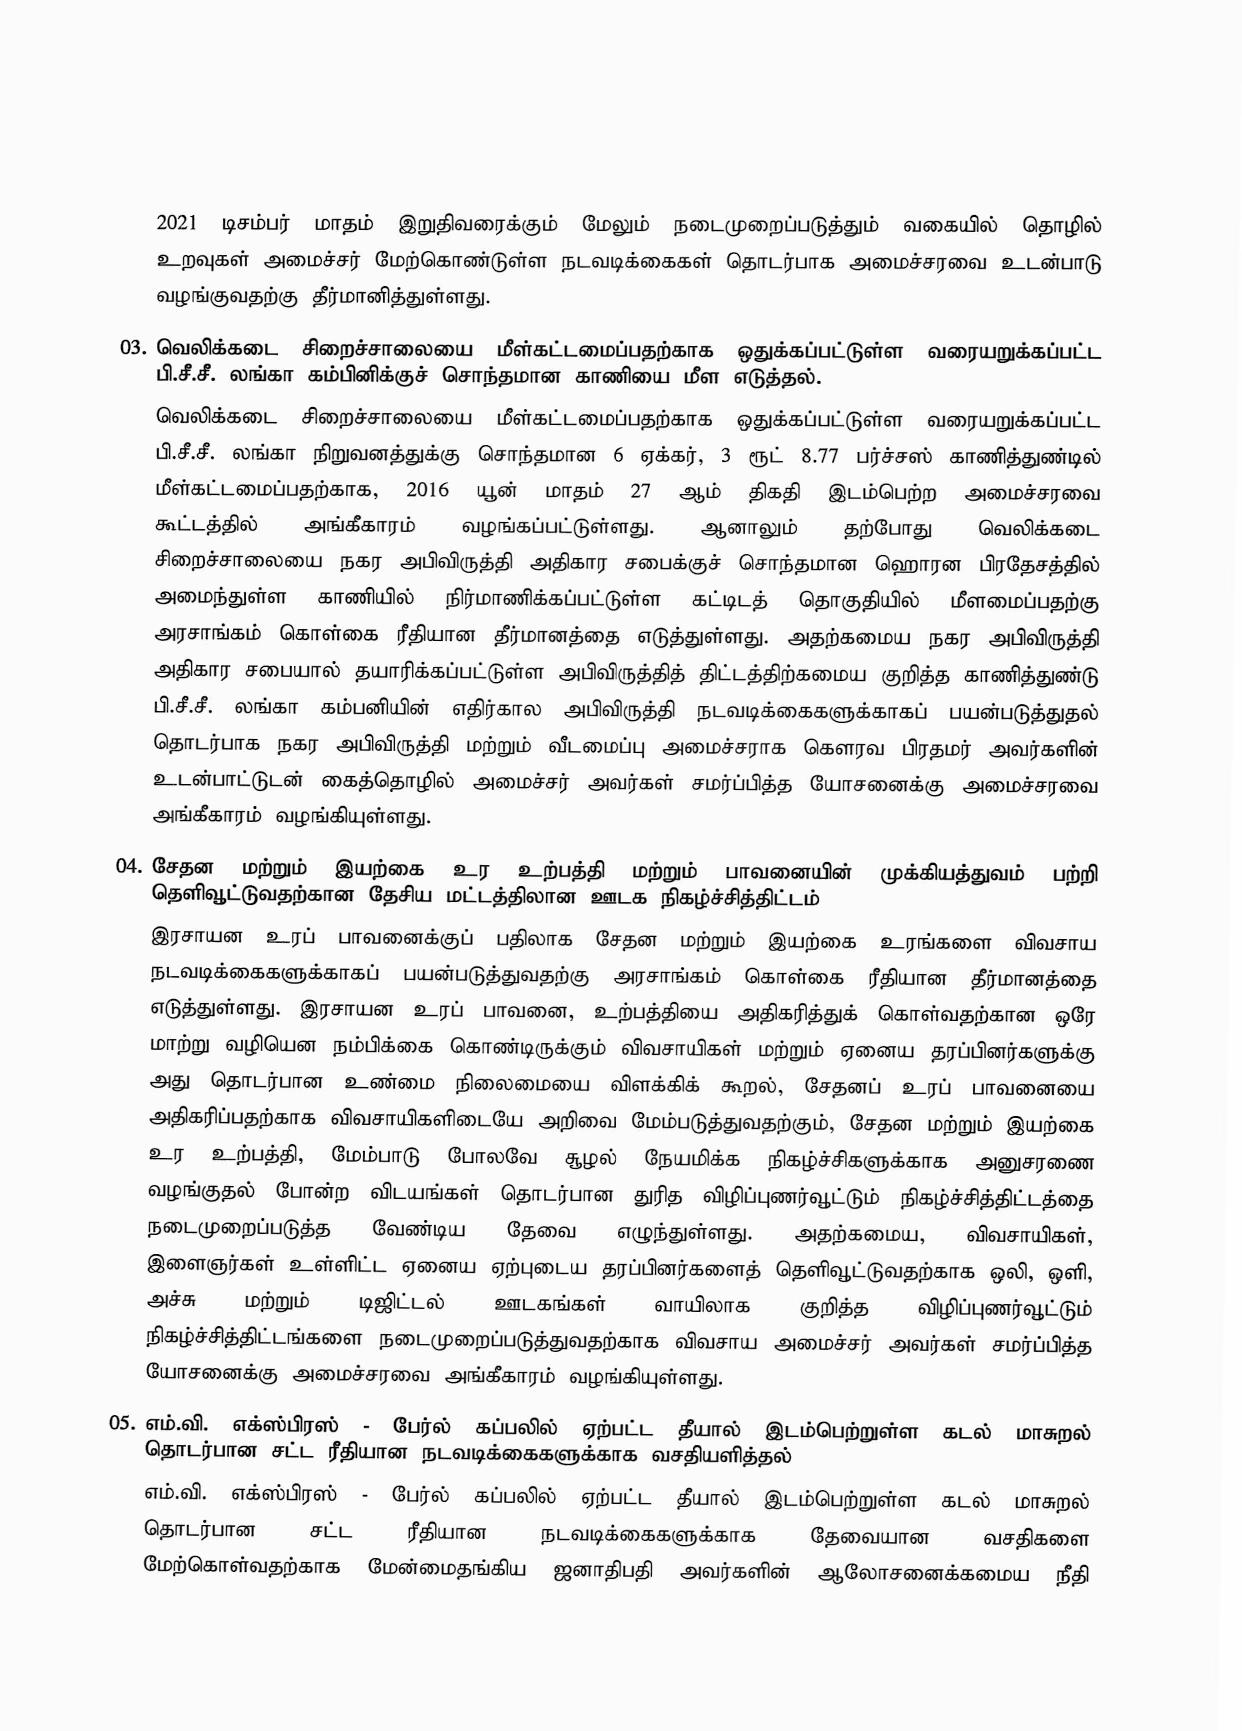 Cabinet Decision on 28.06.2021 Tamil page 002